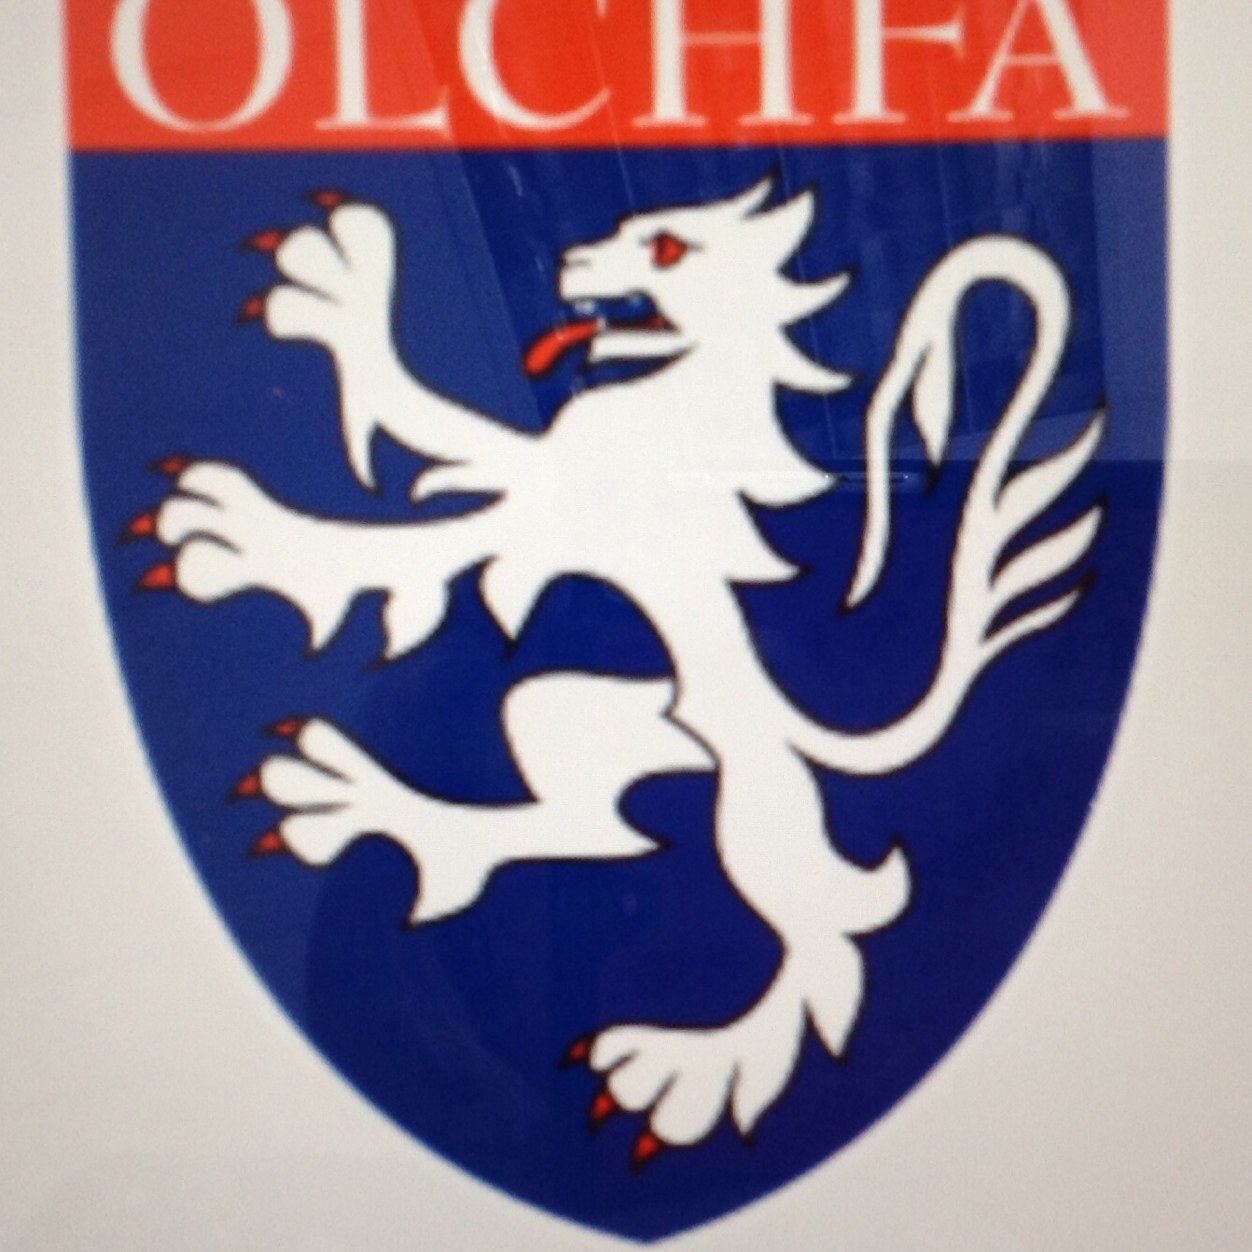 Olchfa Cluster Twitter feed with a focus on KS2 - KS3 Transition.